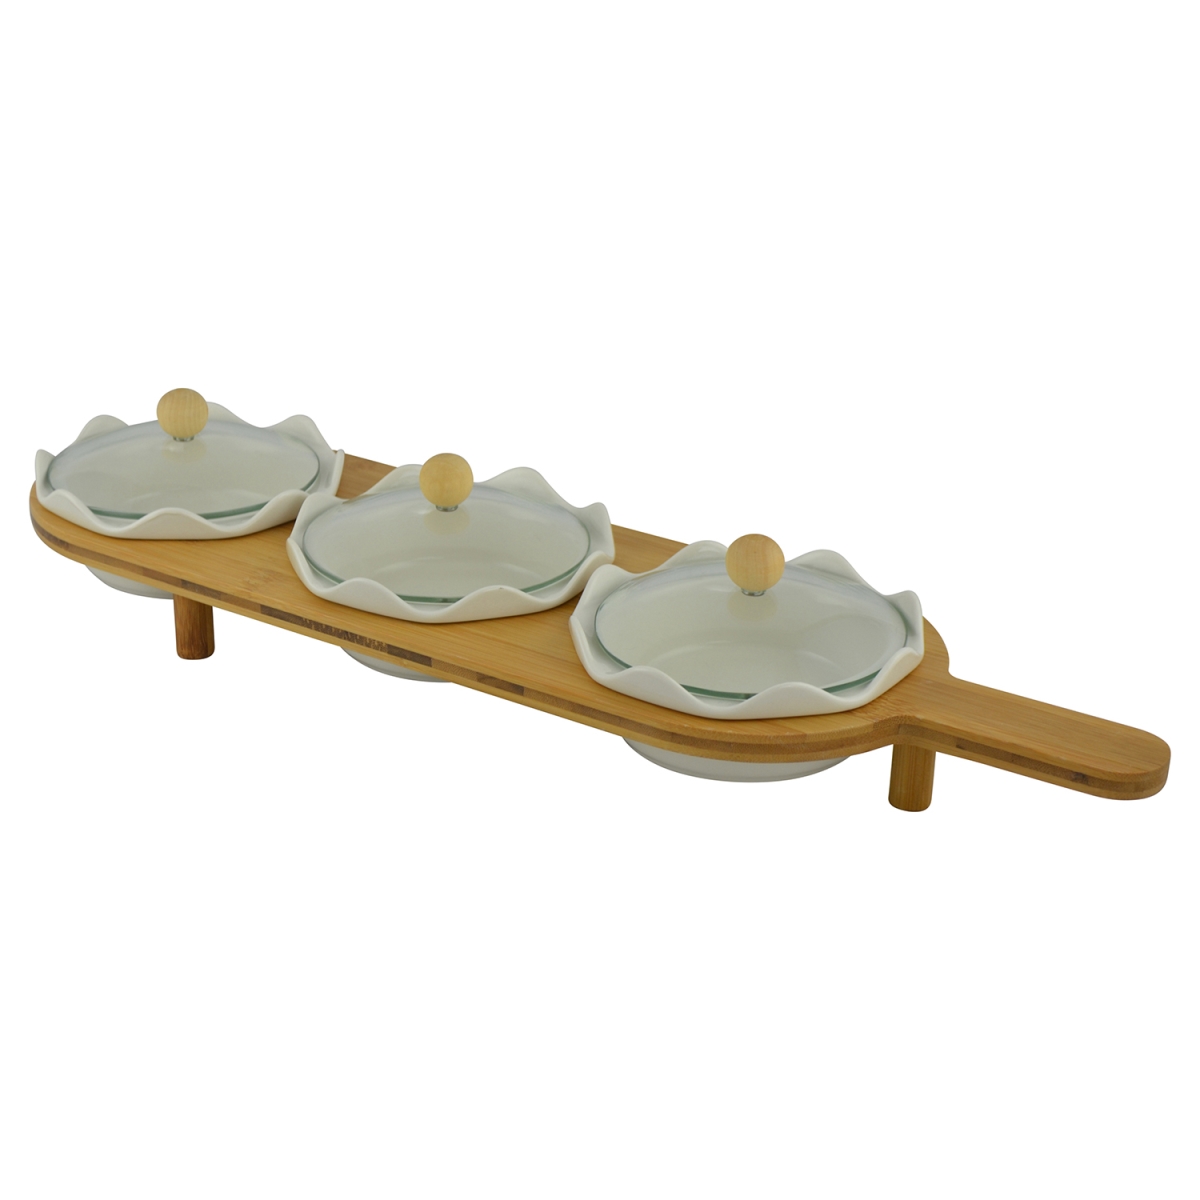 Picture of Three Star KW261 18 x 5 x 3 in. Round Bowls With Lid - 3 Piece